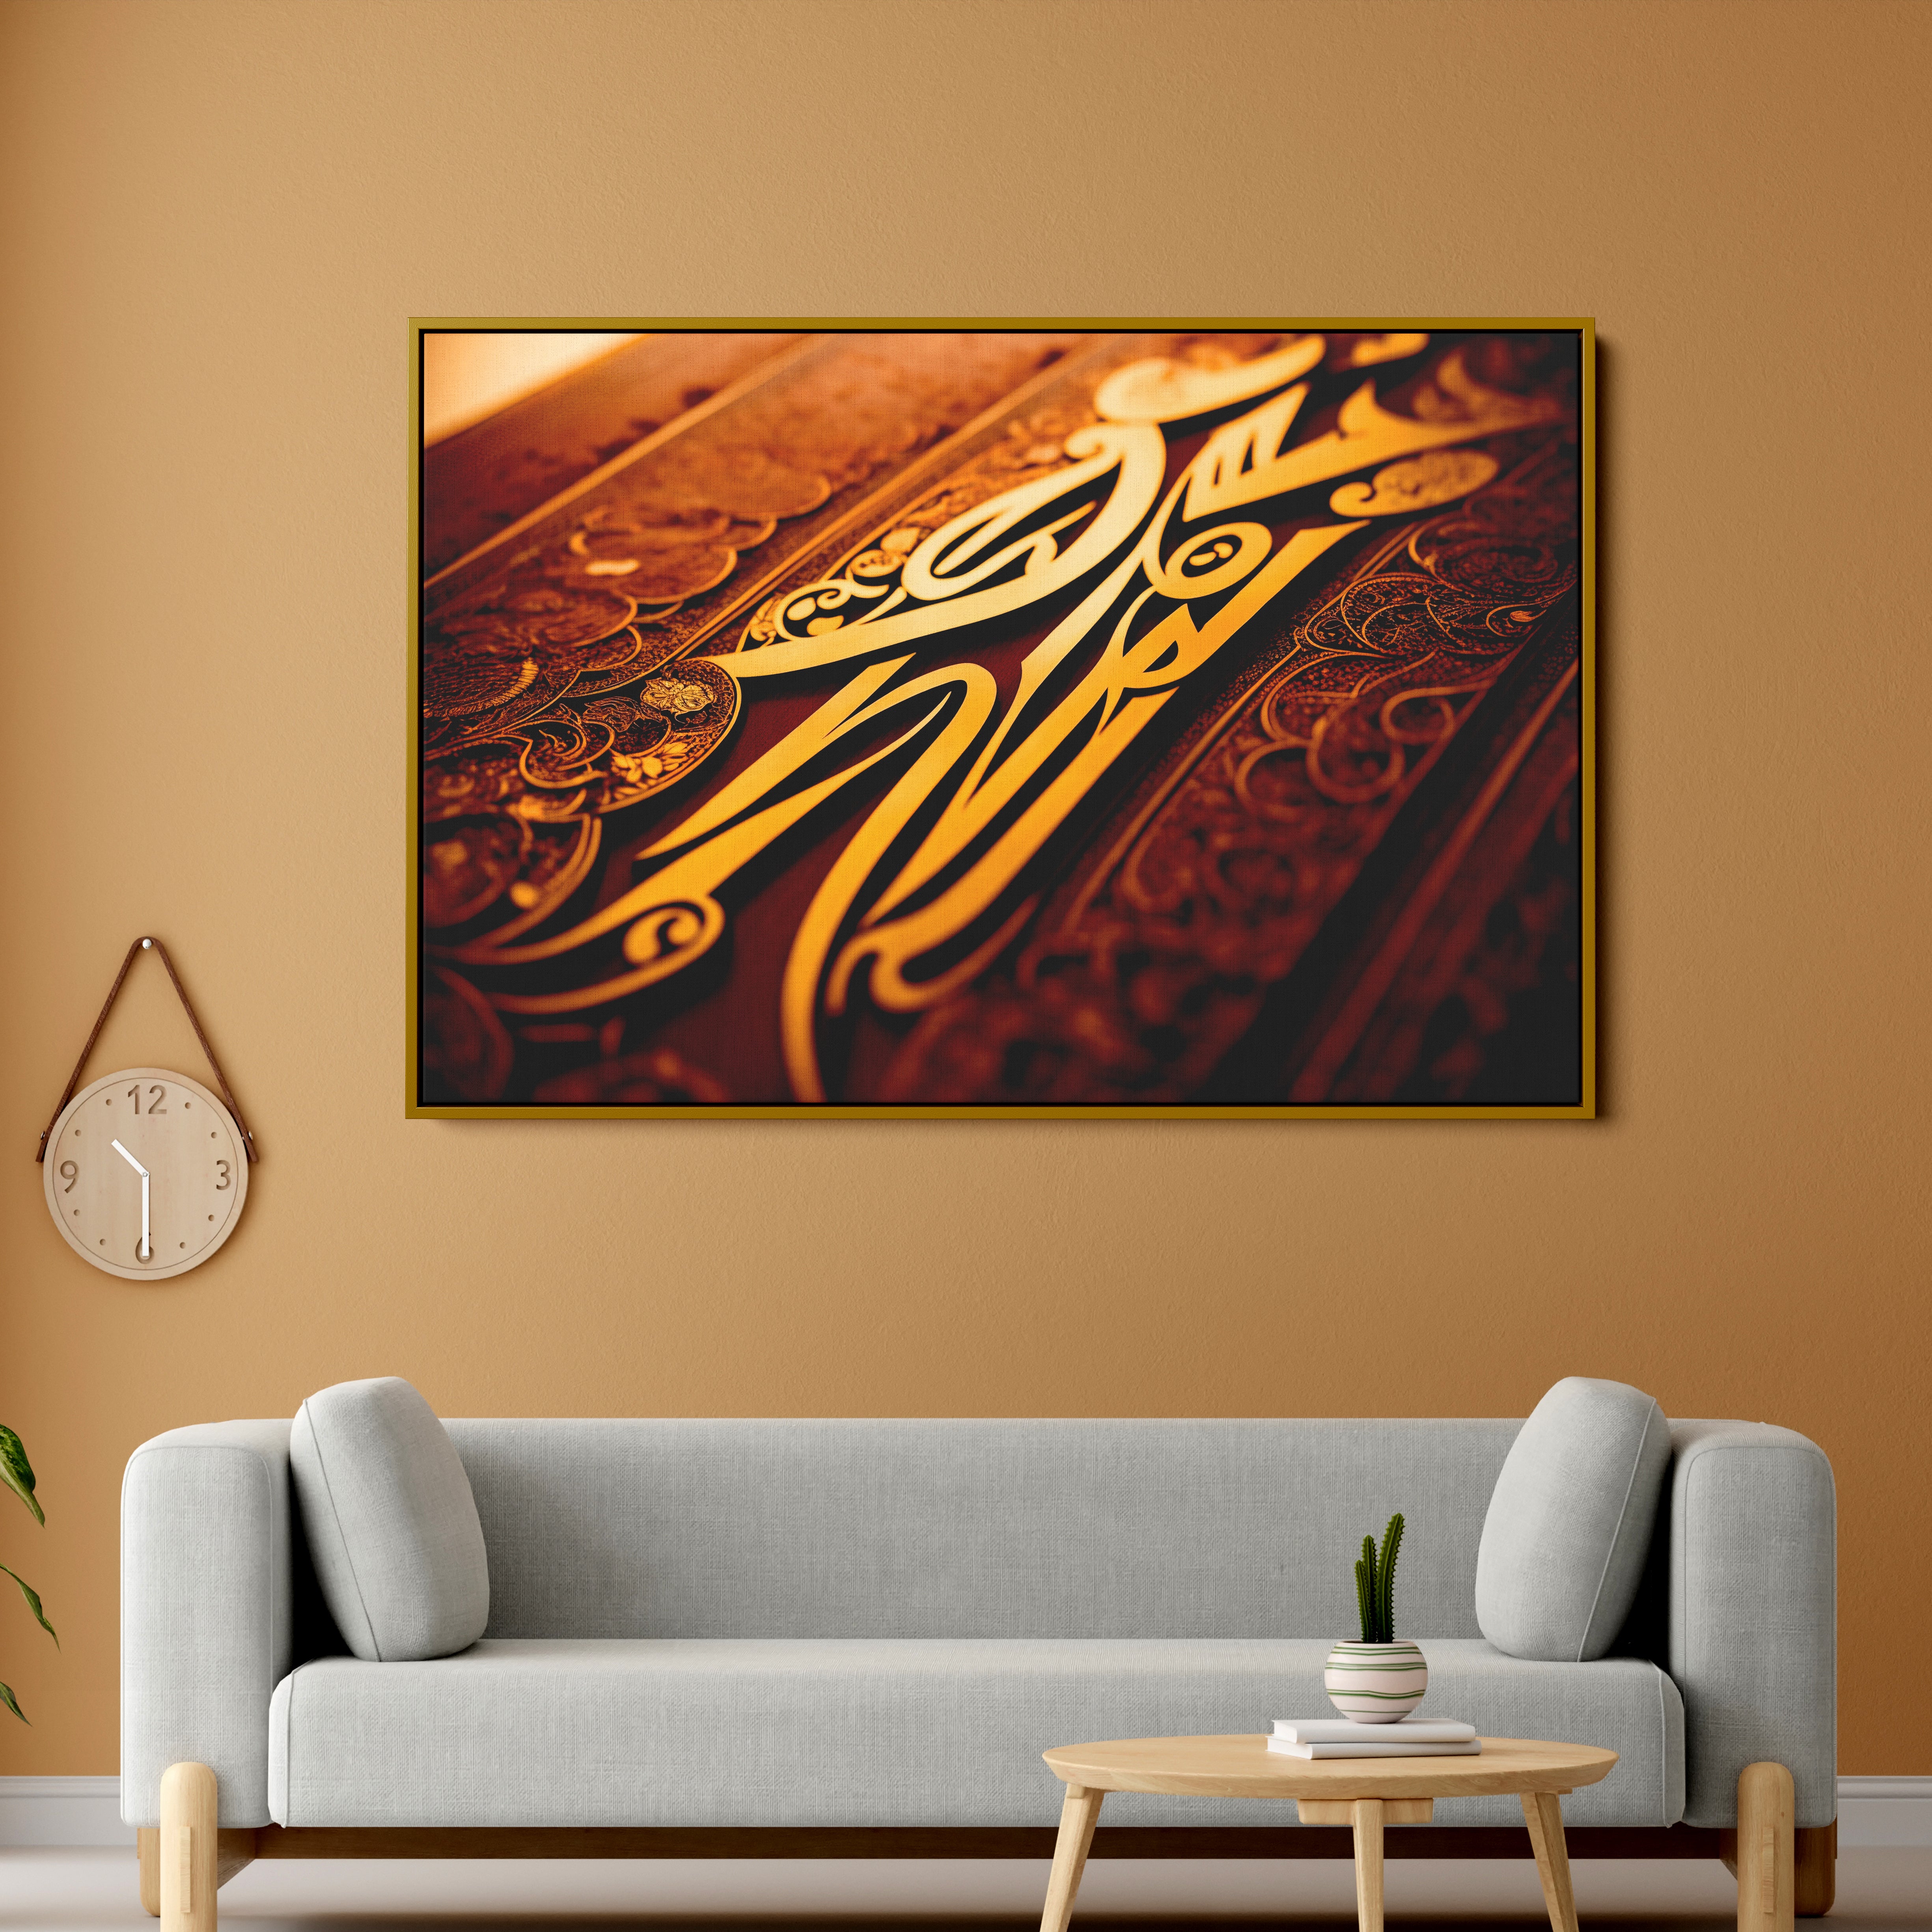 Islamic Golden Word Canvas Wall Painting